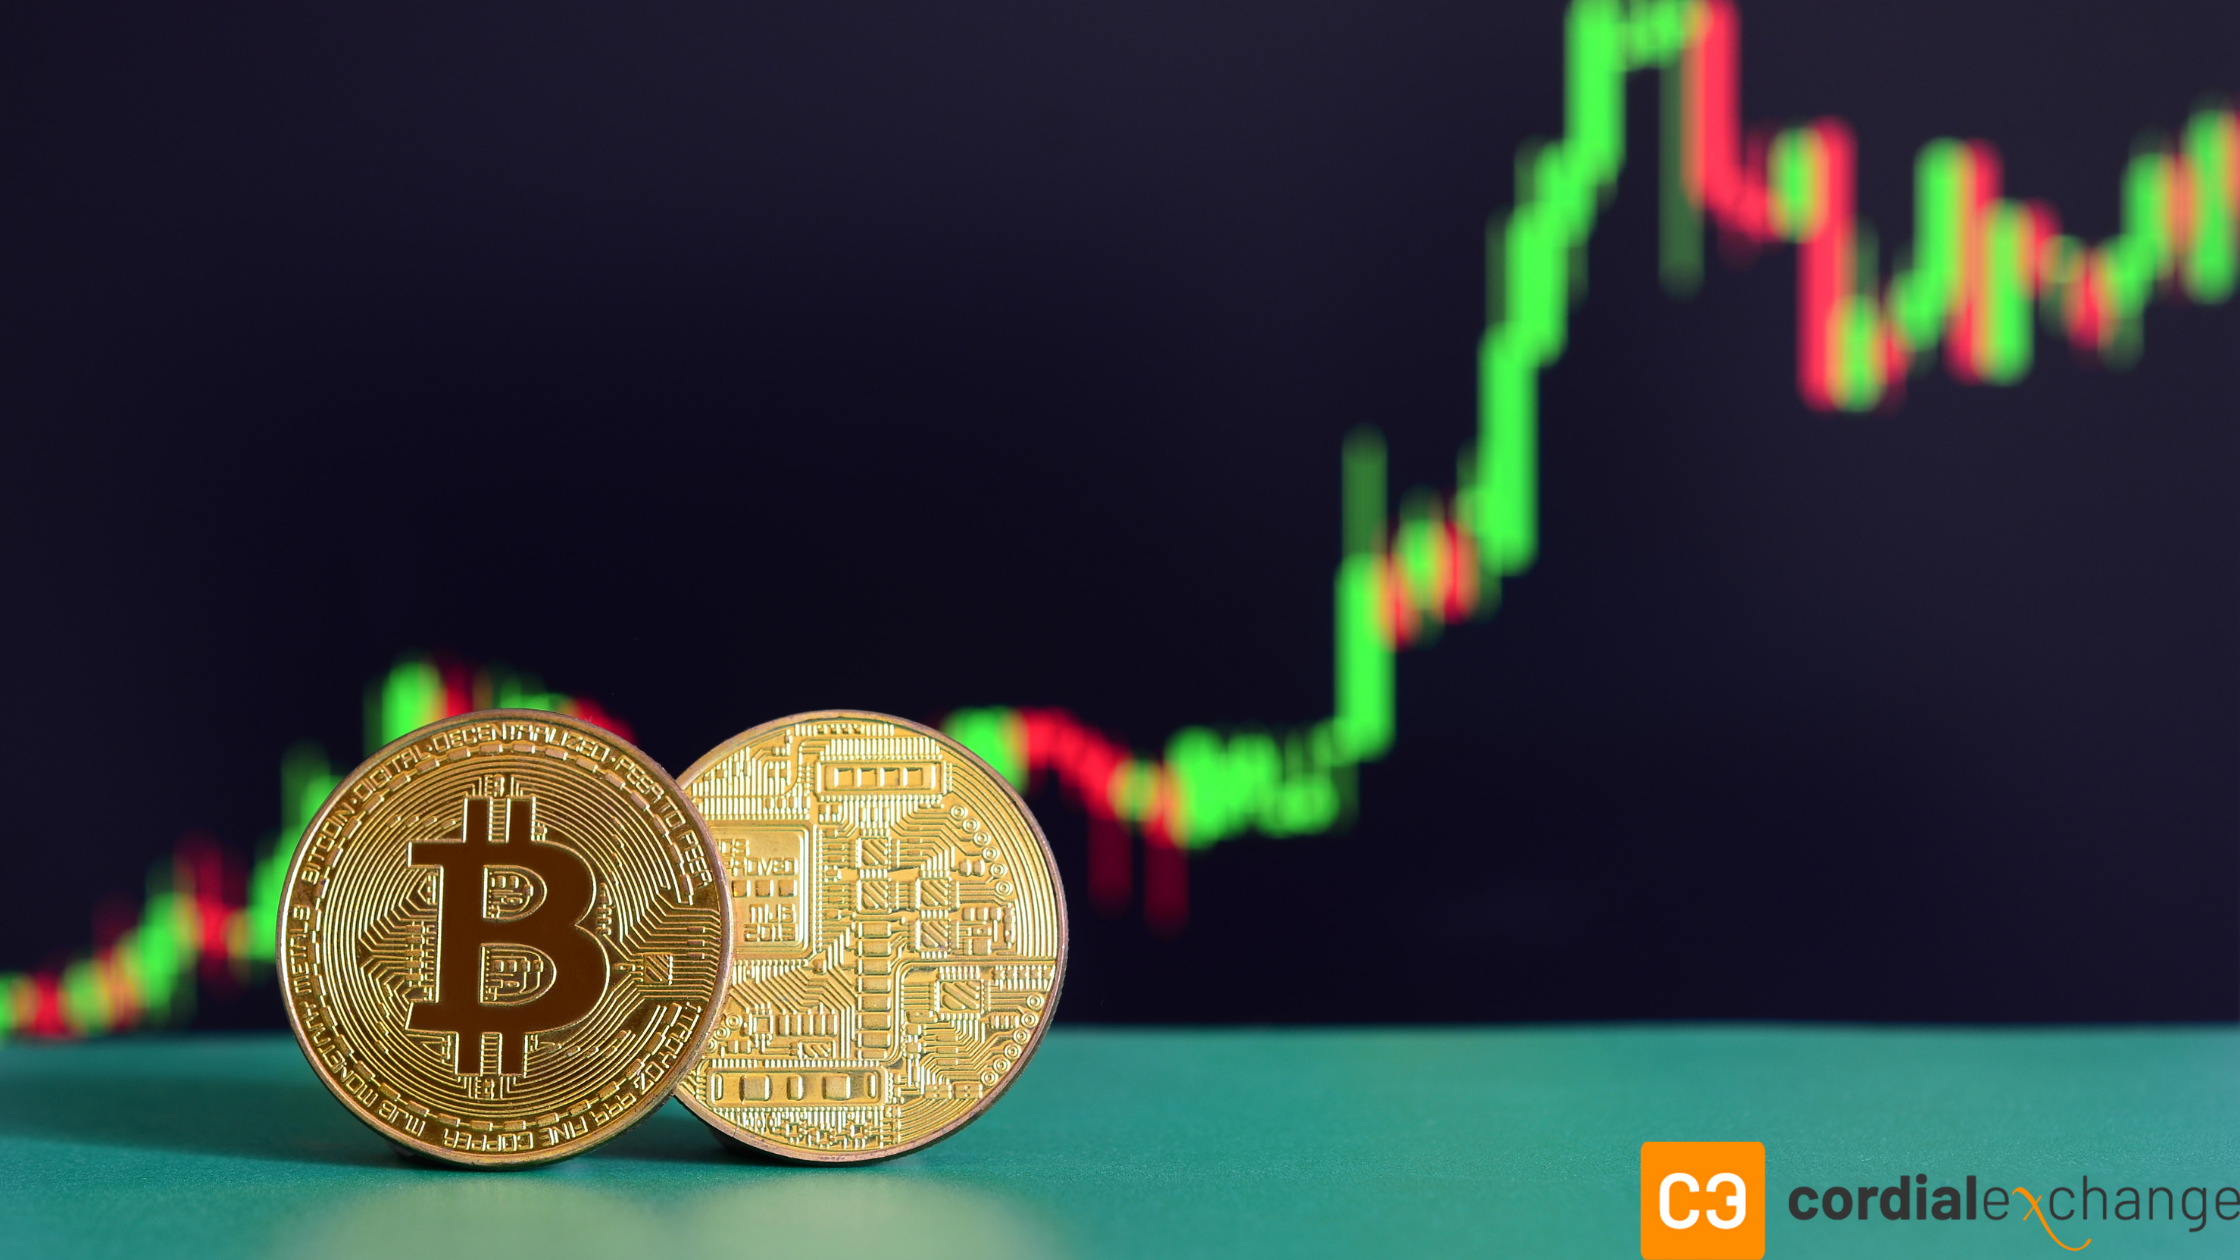 WHY IS BITCOIN PRICE RISING? HERE ARE 3 LEADING REASONS